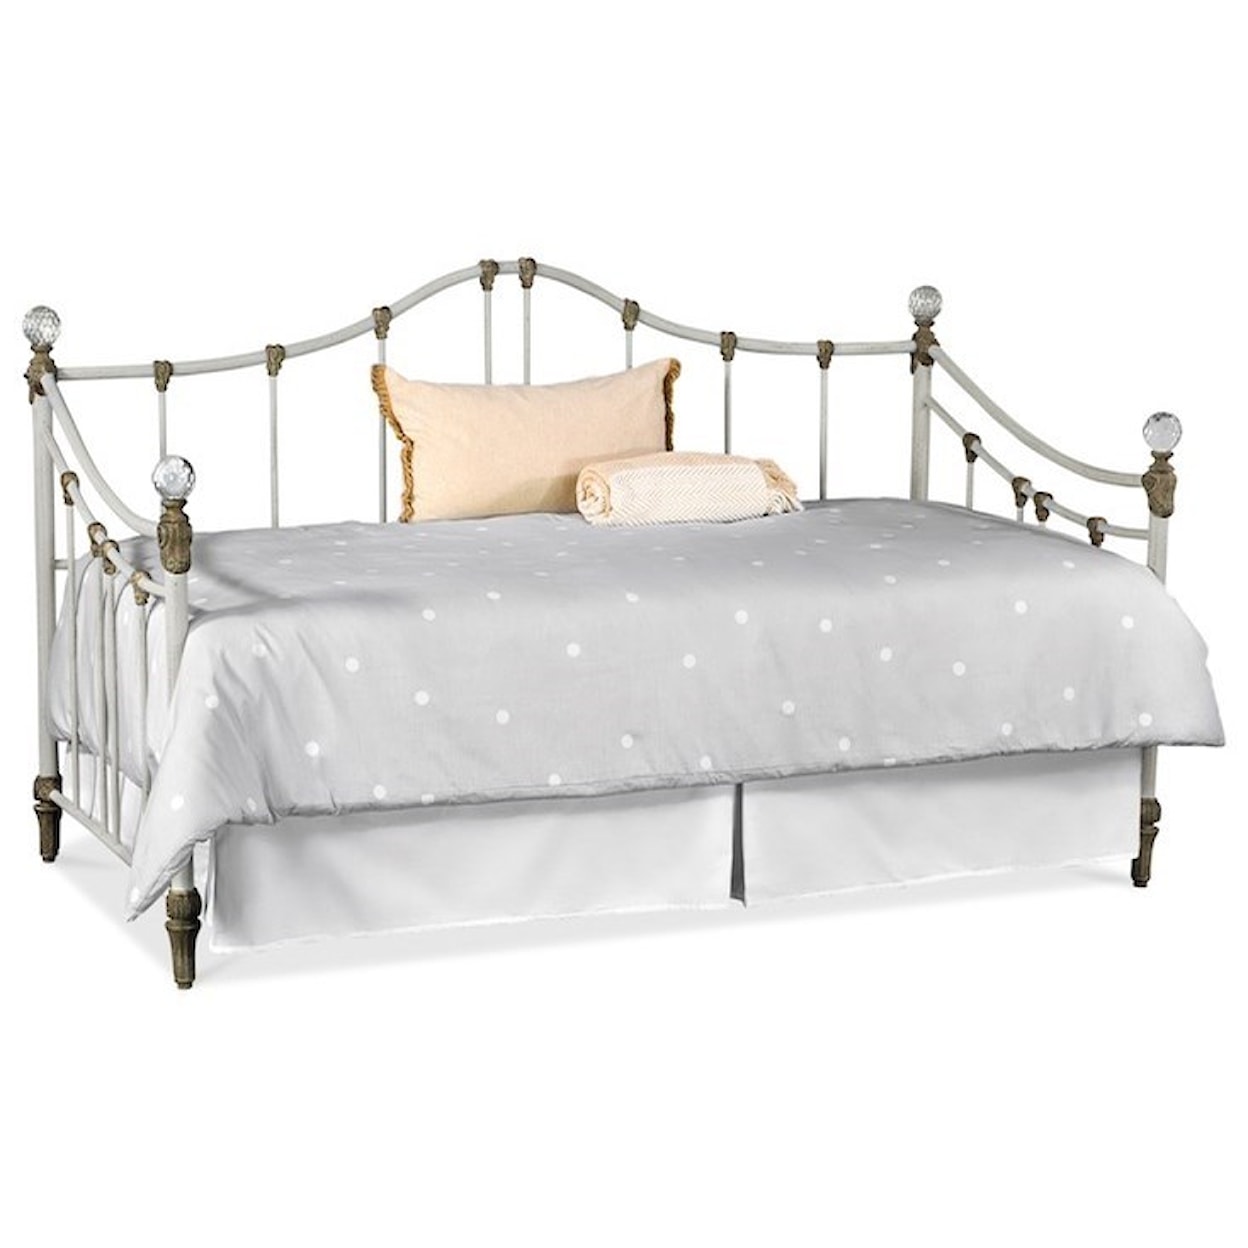 Wesley Allen Iron Beds Otsego Daybed